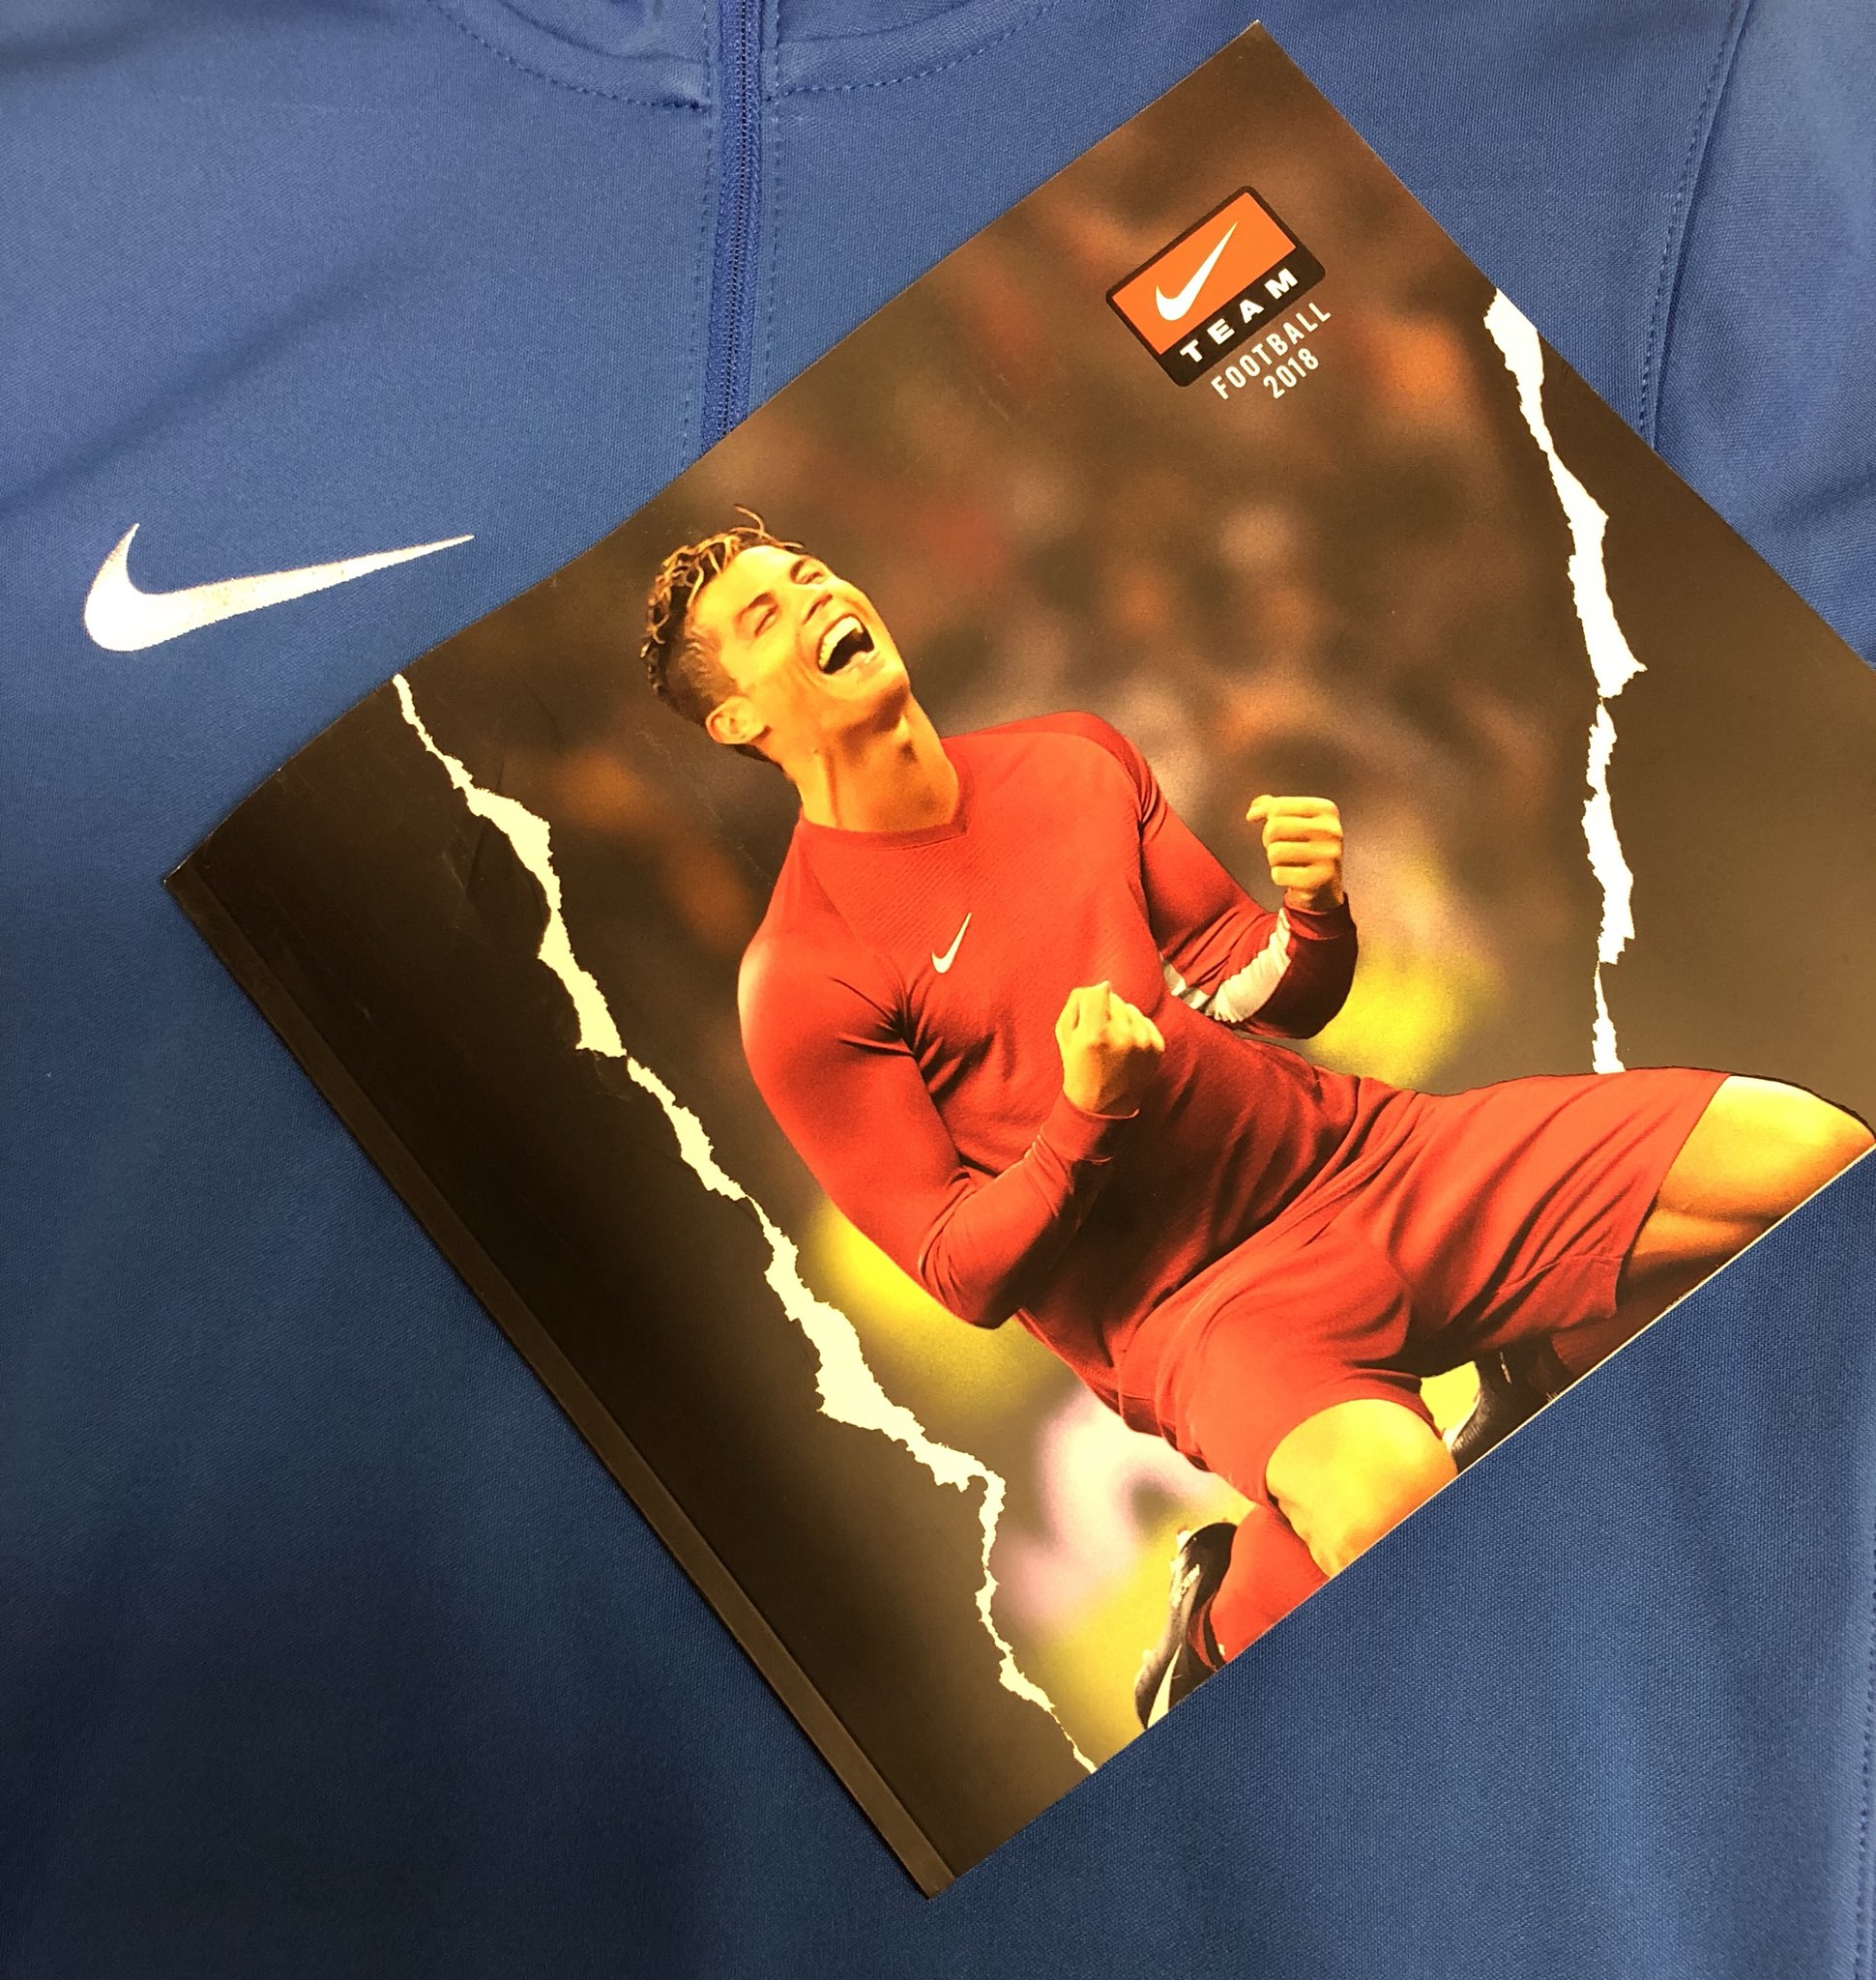 Football 1st on "New NIKE teamwear catalogue out now. For a for SPECIAL OFFERS message us or contact sales@football1st.com https://t.co/4jUKy1vpKE" / Twitter